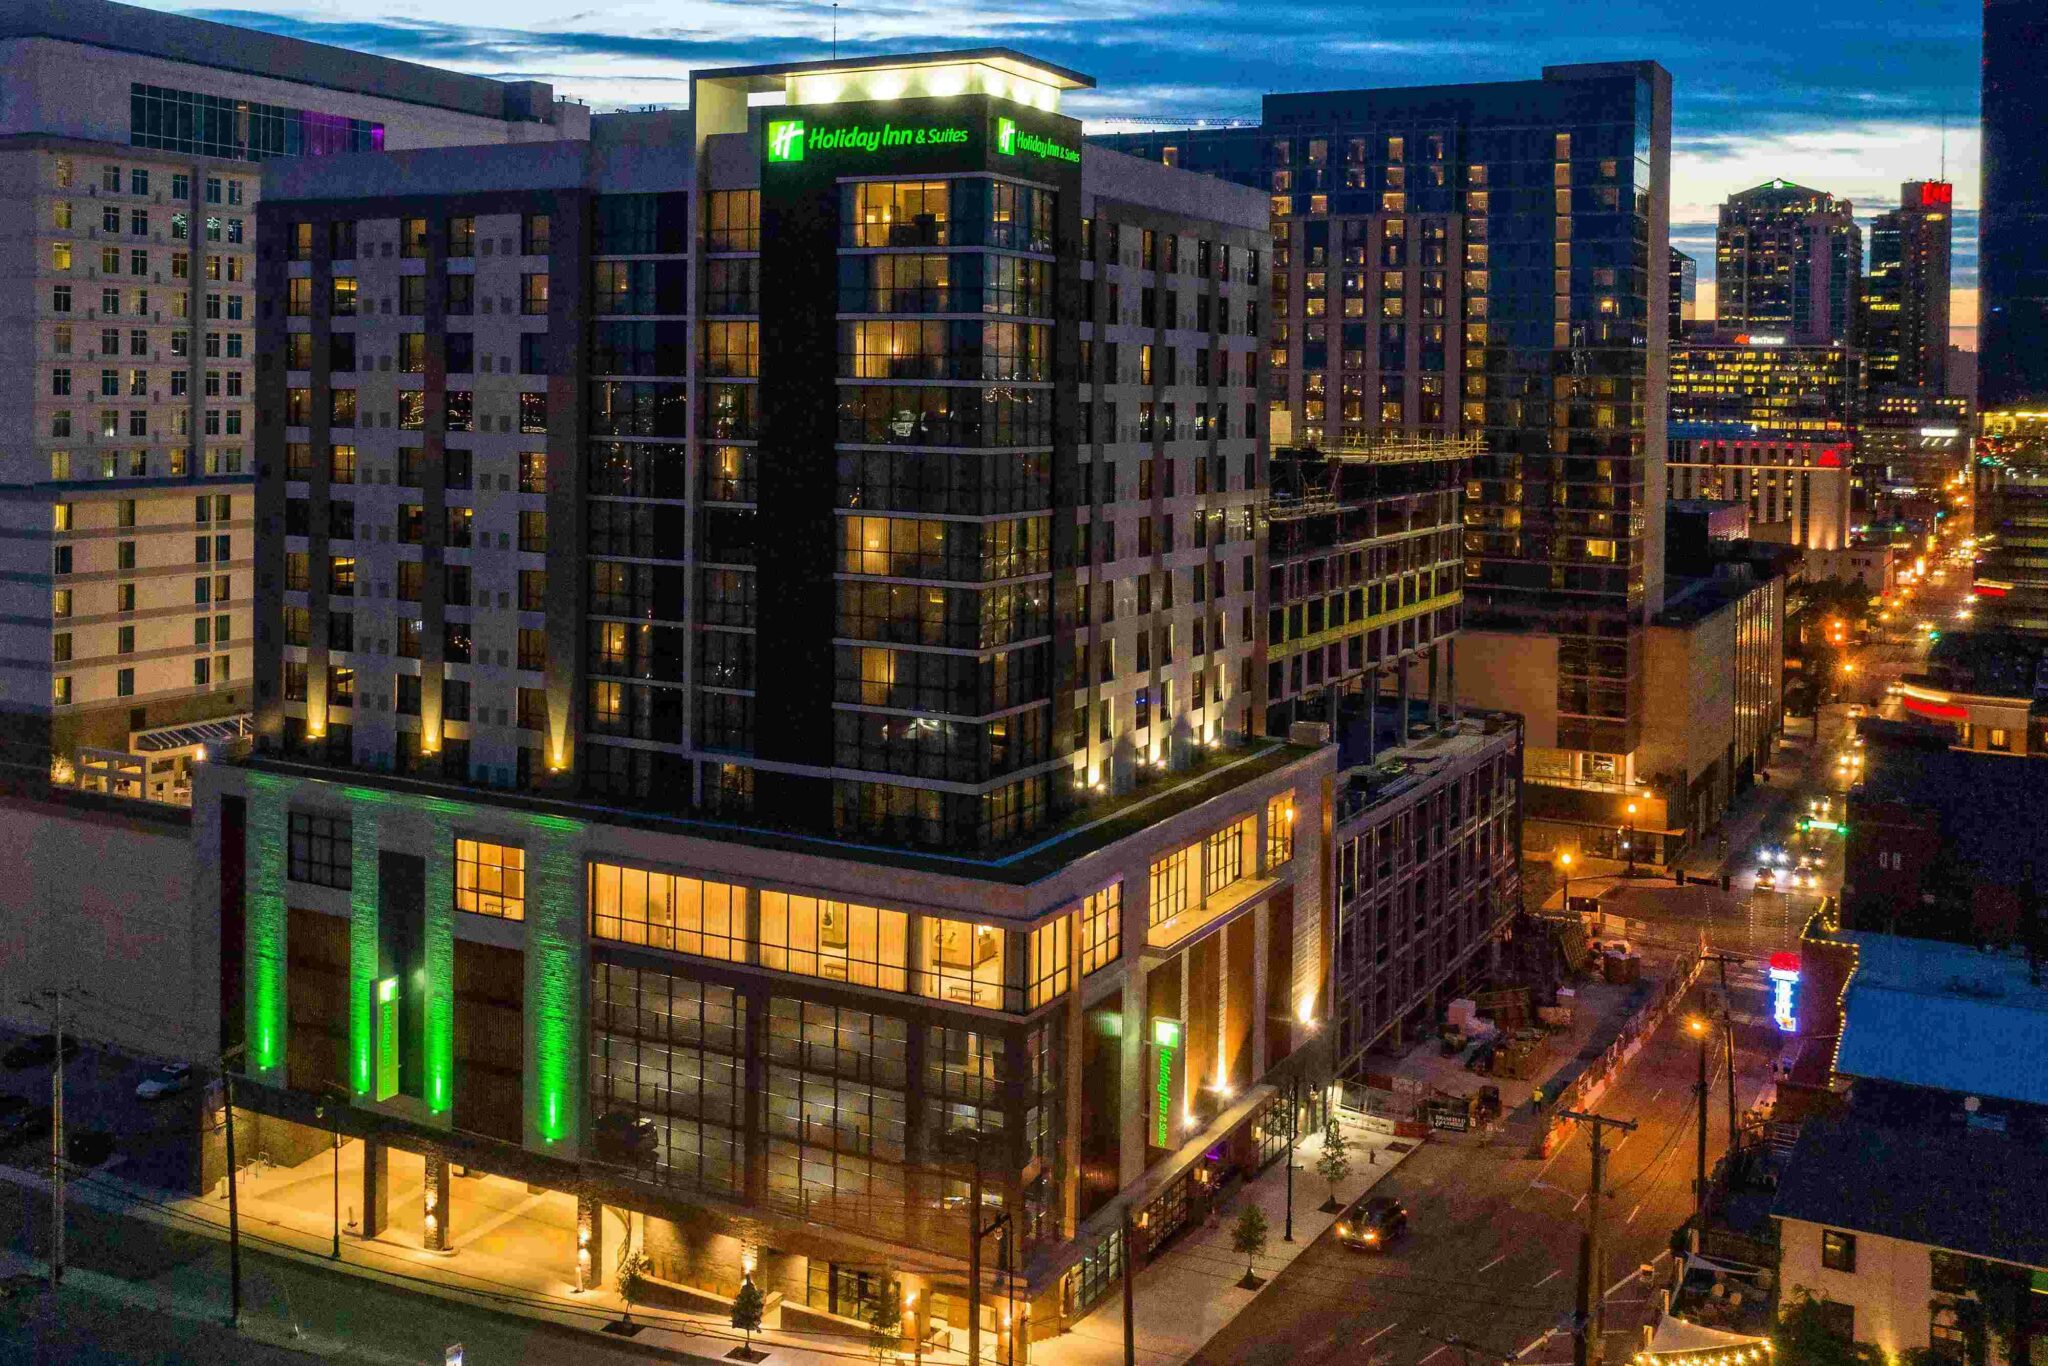 Holiday Inn Hotel And Suites Nashville 6071774744 3x2 1 2048x1366 